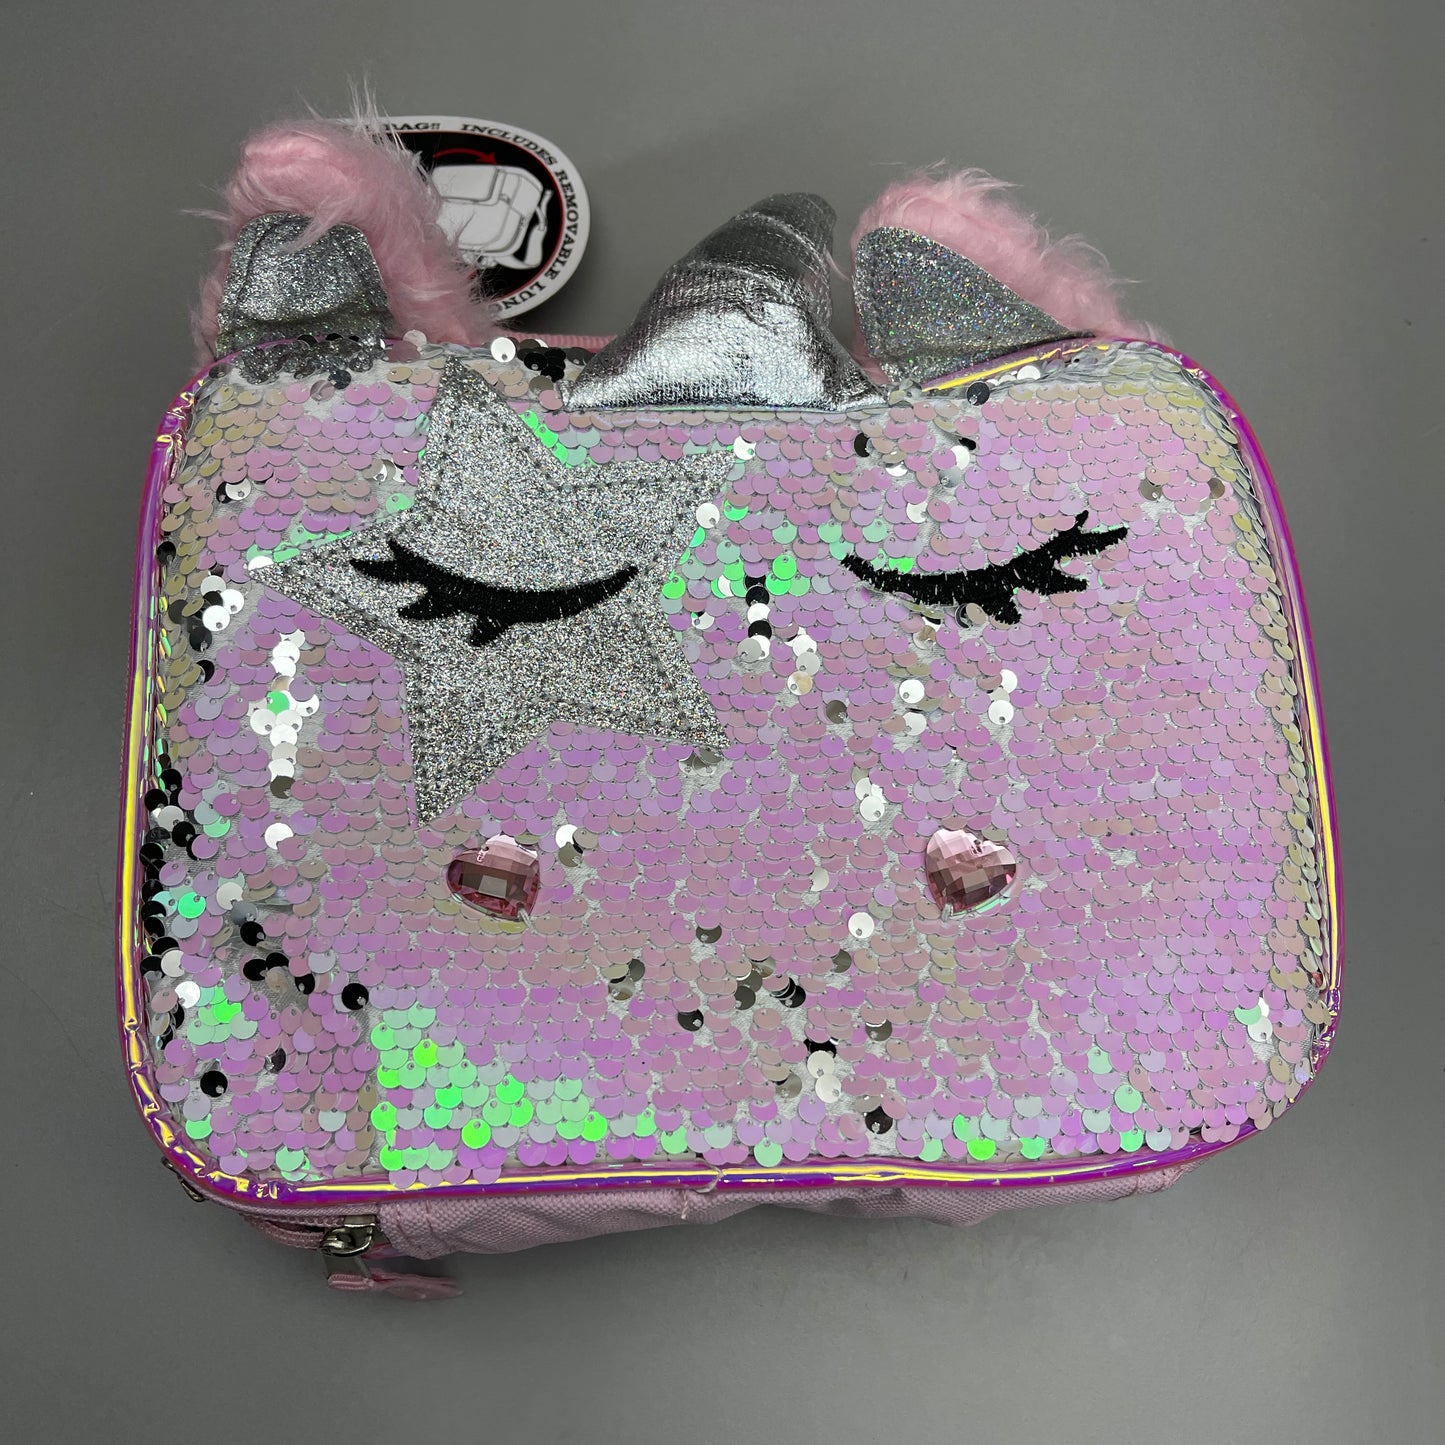 ACCESSORY INNOVATIONS Wonder Nation Unicorn Backpack & Lunch Bag Pink